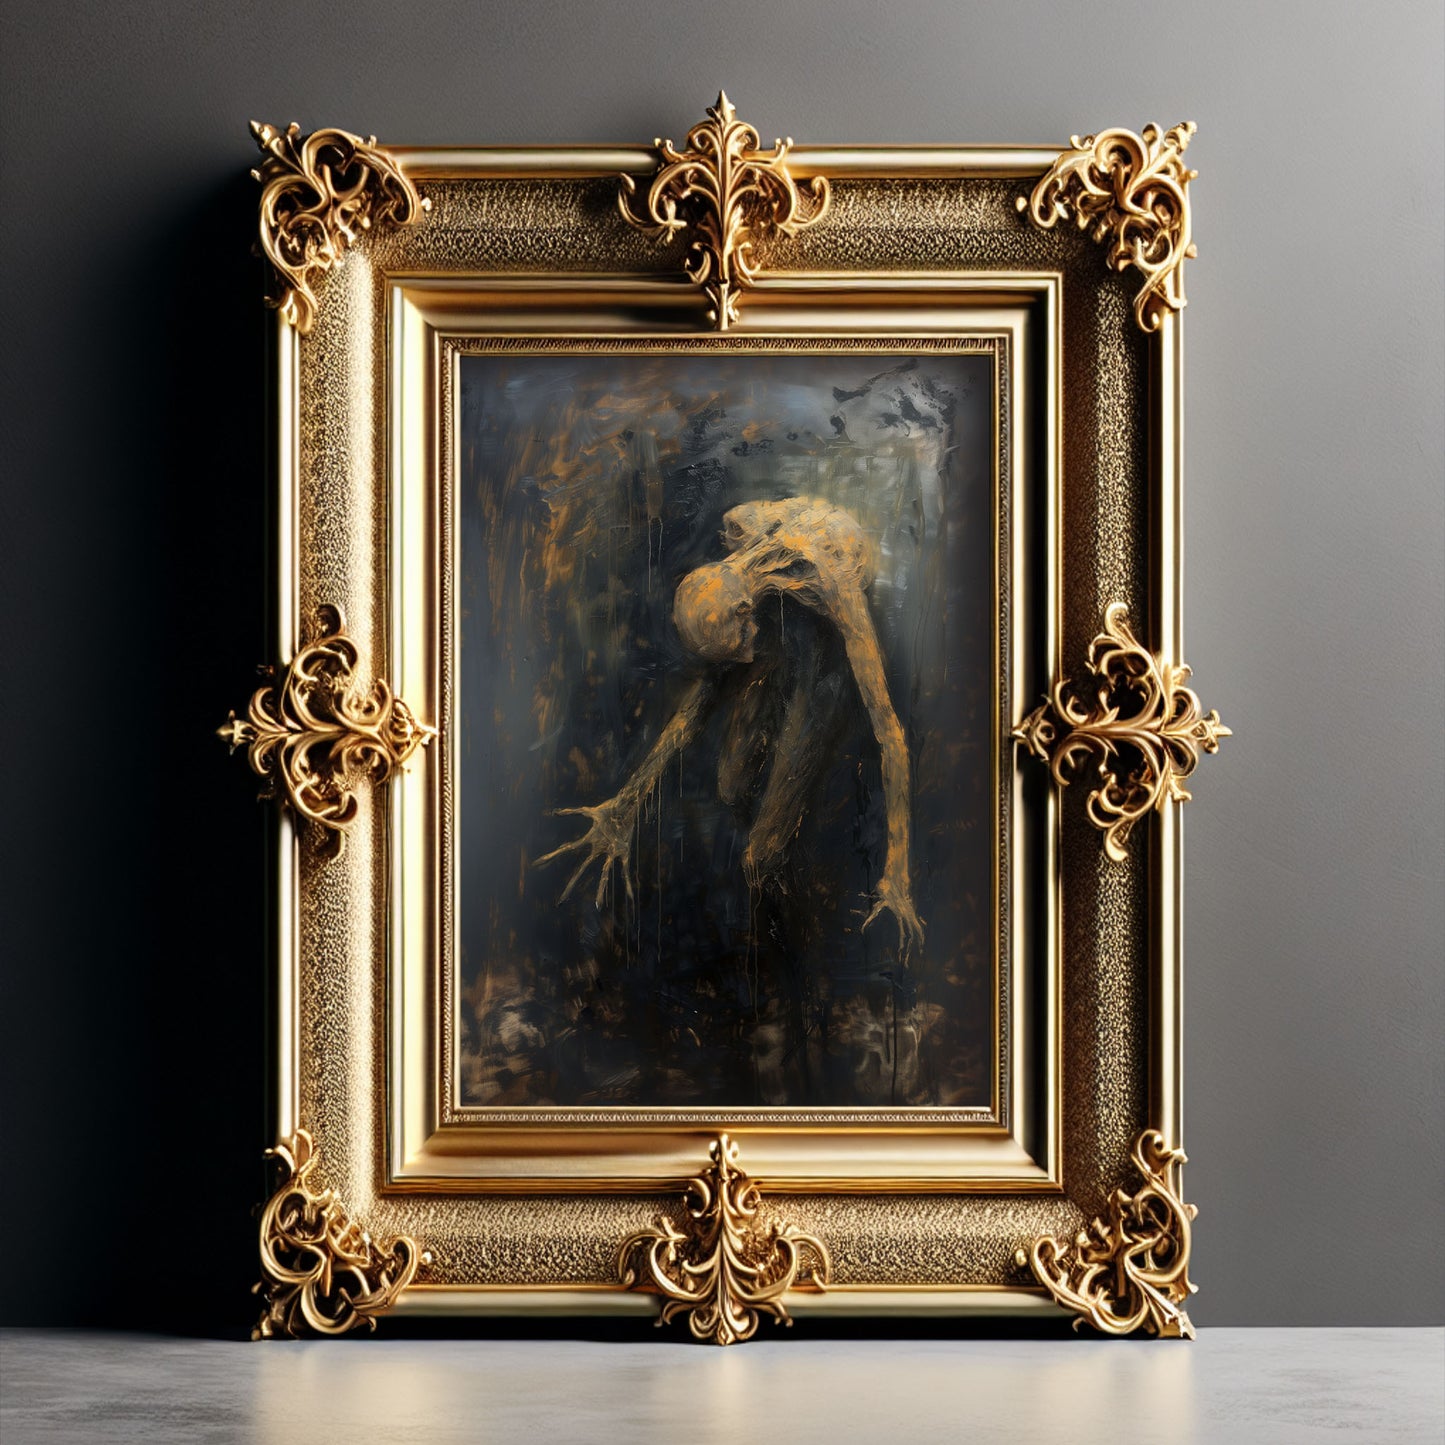 Gritty Scary Oil Painting of Bent Over Creature - Gothic Poster Print